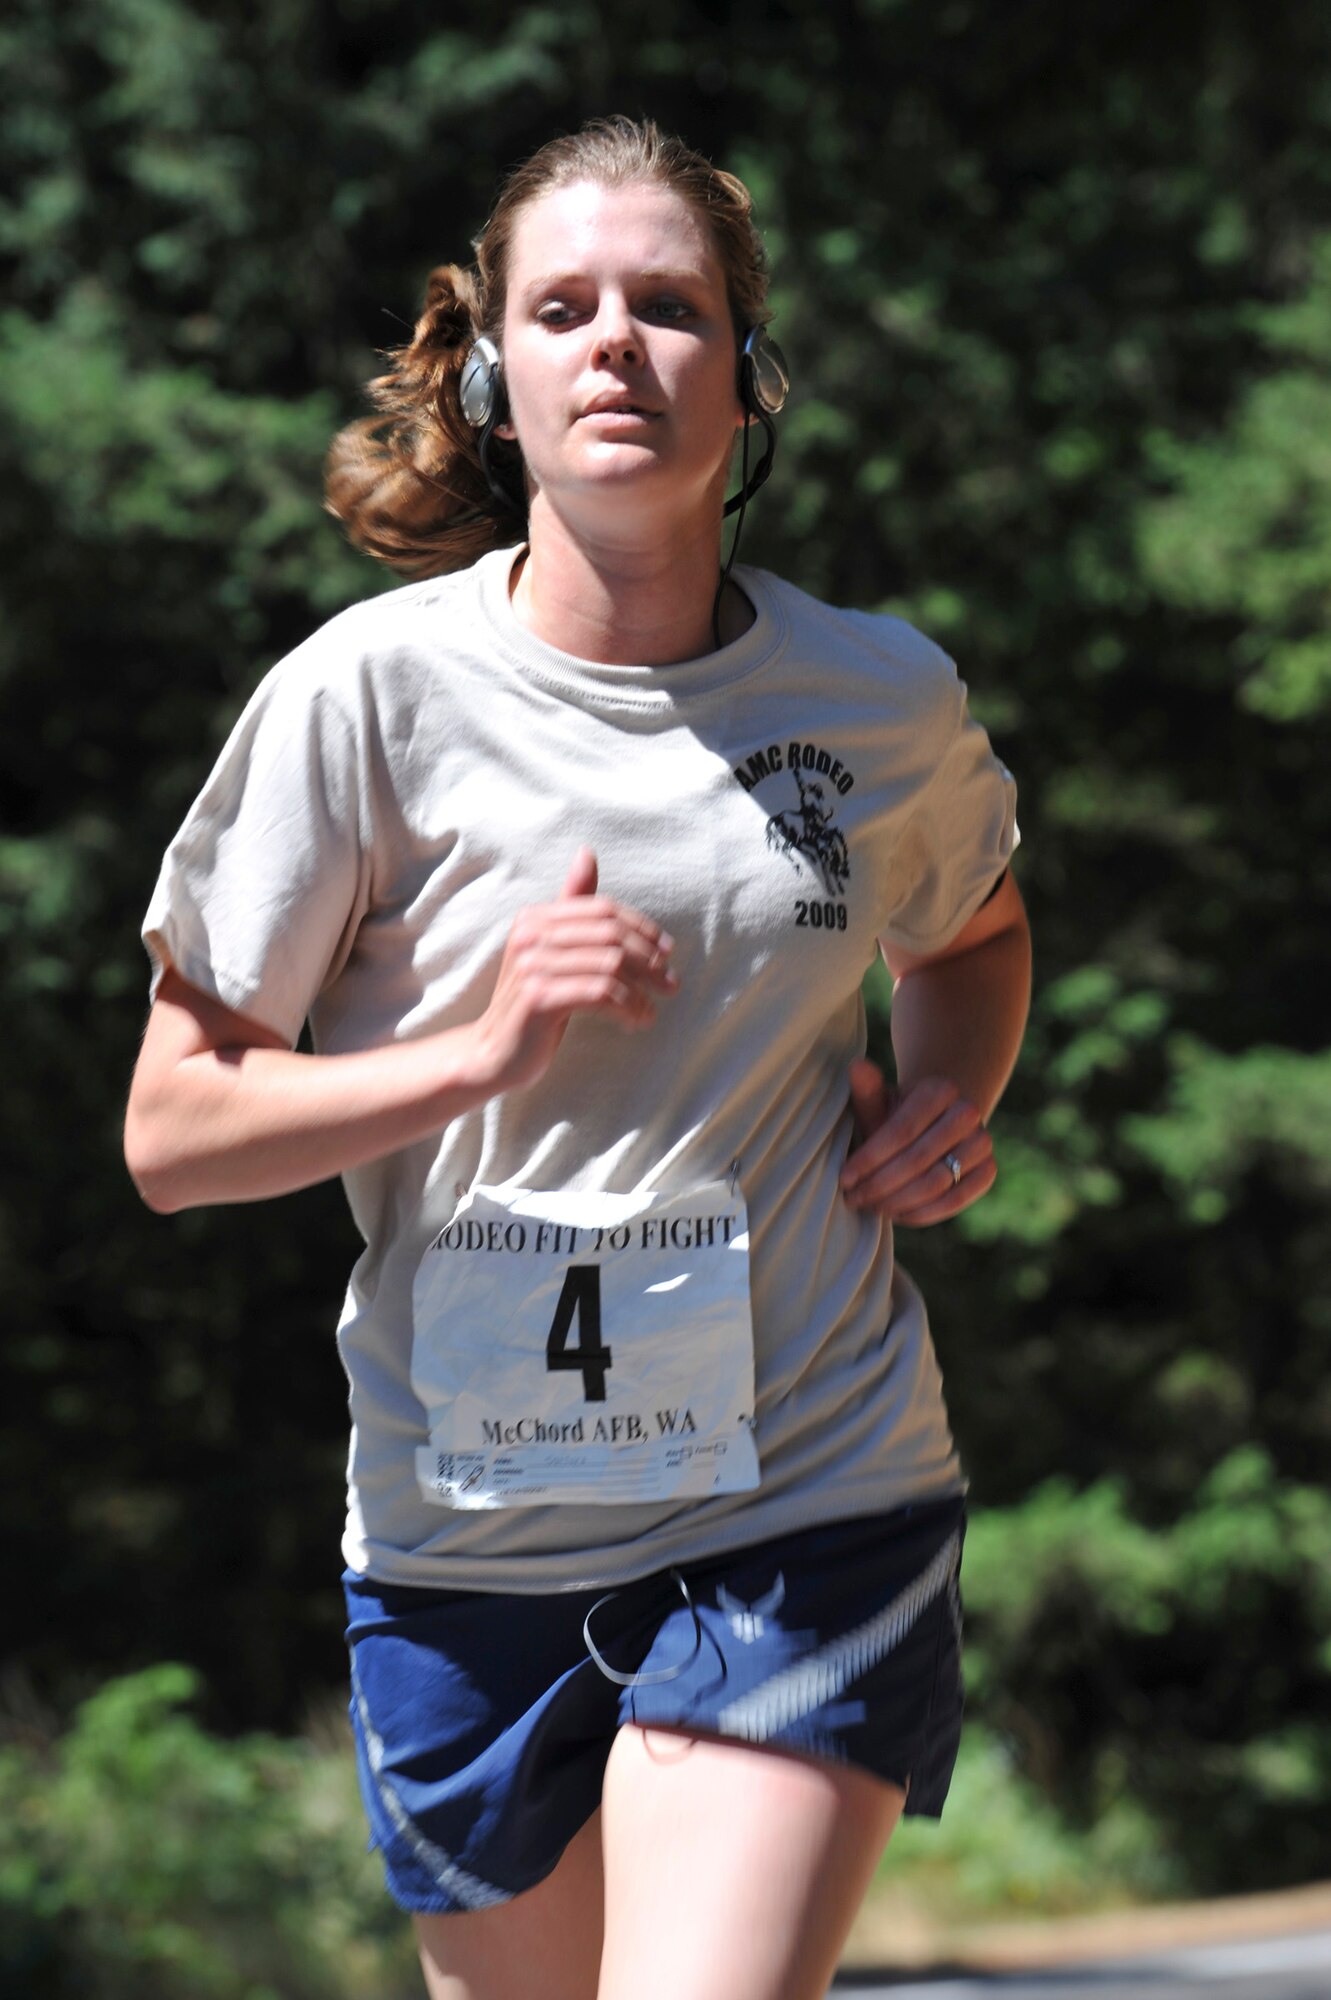 Capt. Sarah Santoro, 37th Airlift Squadron, participates in the 1.5-mile run as part of the Air Mobility Rodeo competition at McChord Air Force Base, Wash. Team Ramstein members from the 86th Airlift Wing placed 4th of 54 teams during the Fit to Fight competition. More than 50 Airmen from Team Ramstein were part of the 2,500 servicemembers from around the Air Force and the globe participating in the rodeo. The competition, which went from Jul 19 to 24, is a bi-annual mobility readiness exercises that brings teams together to compete in more than 50 judged events spanning the categories of aerial port, aeromedical evacuation, aircrew, fit to fight, maintenance and security forces.  (Courtesy photo).